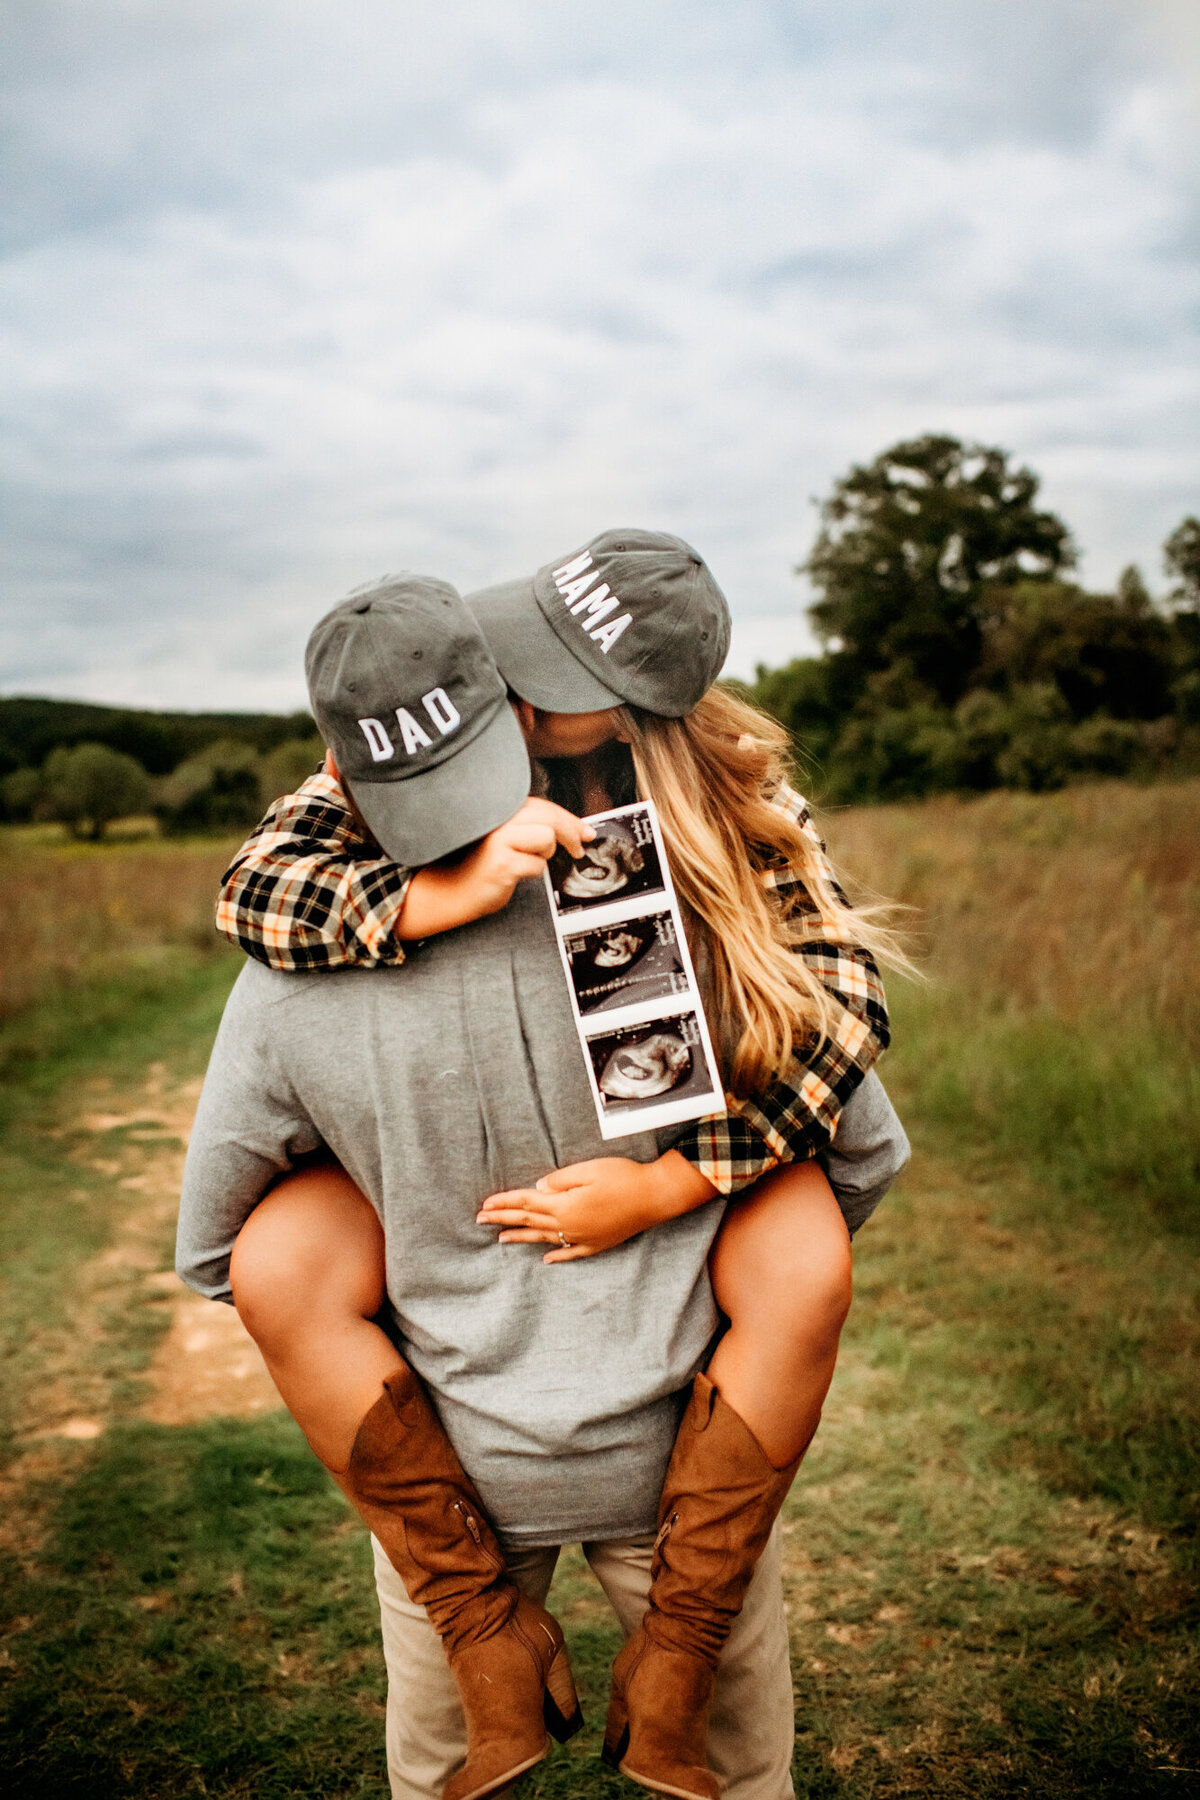 Couples Photography, Man with a hat that says "Dad" is holding a woman wearing a hat that says "Mama" as she holds an ultrasound picture.